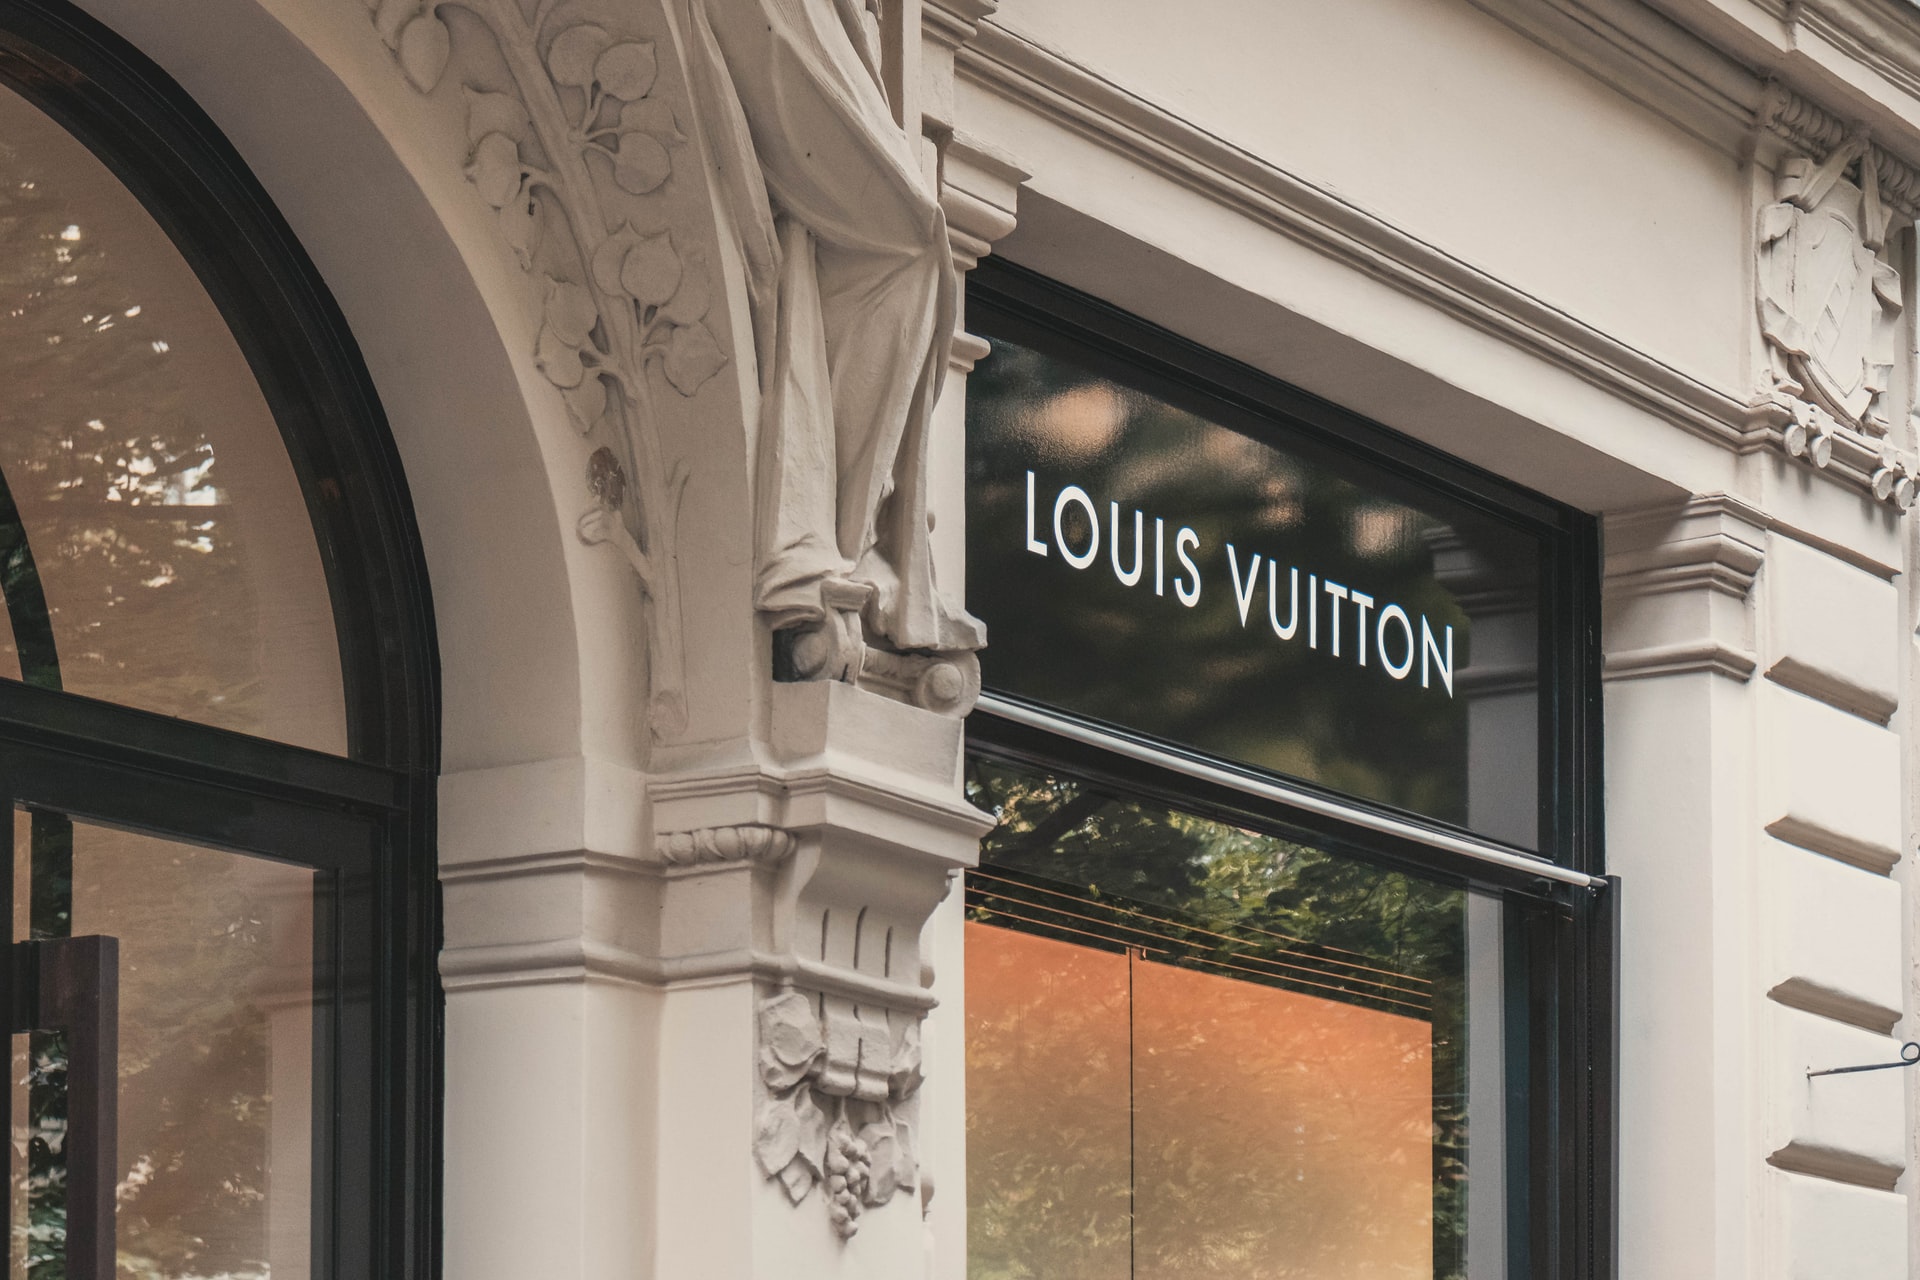 How to Pronounce LVMH - Moet Hennessy Louis Vuitton 